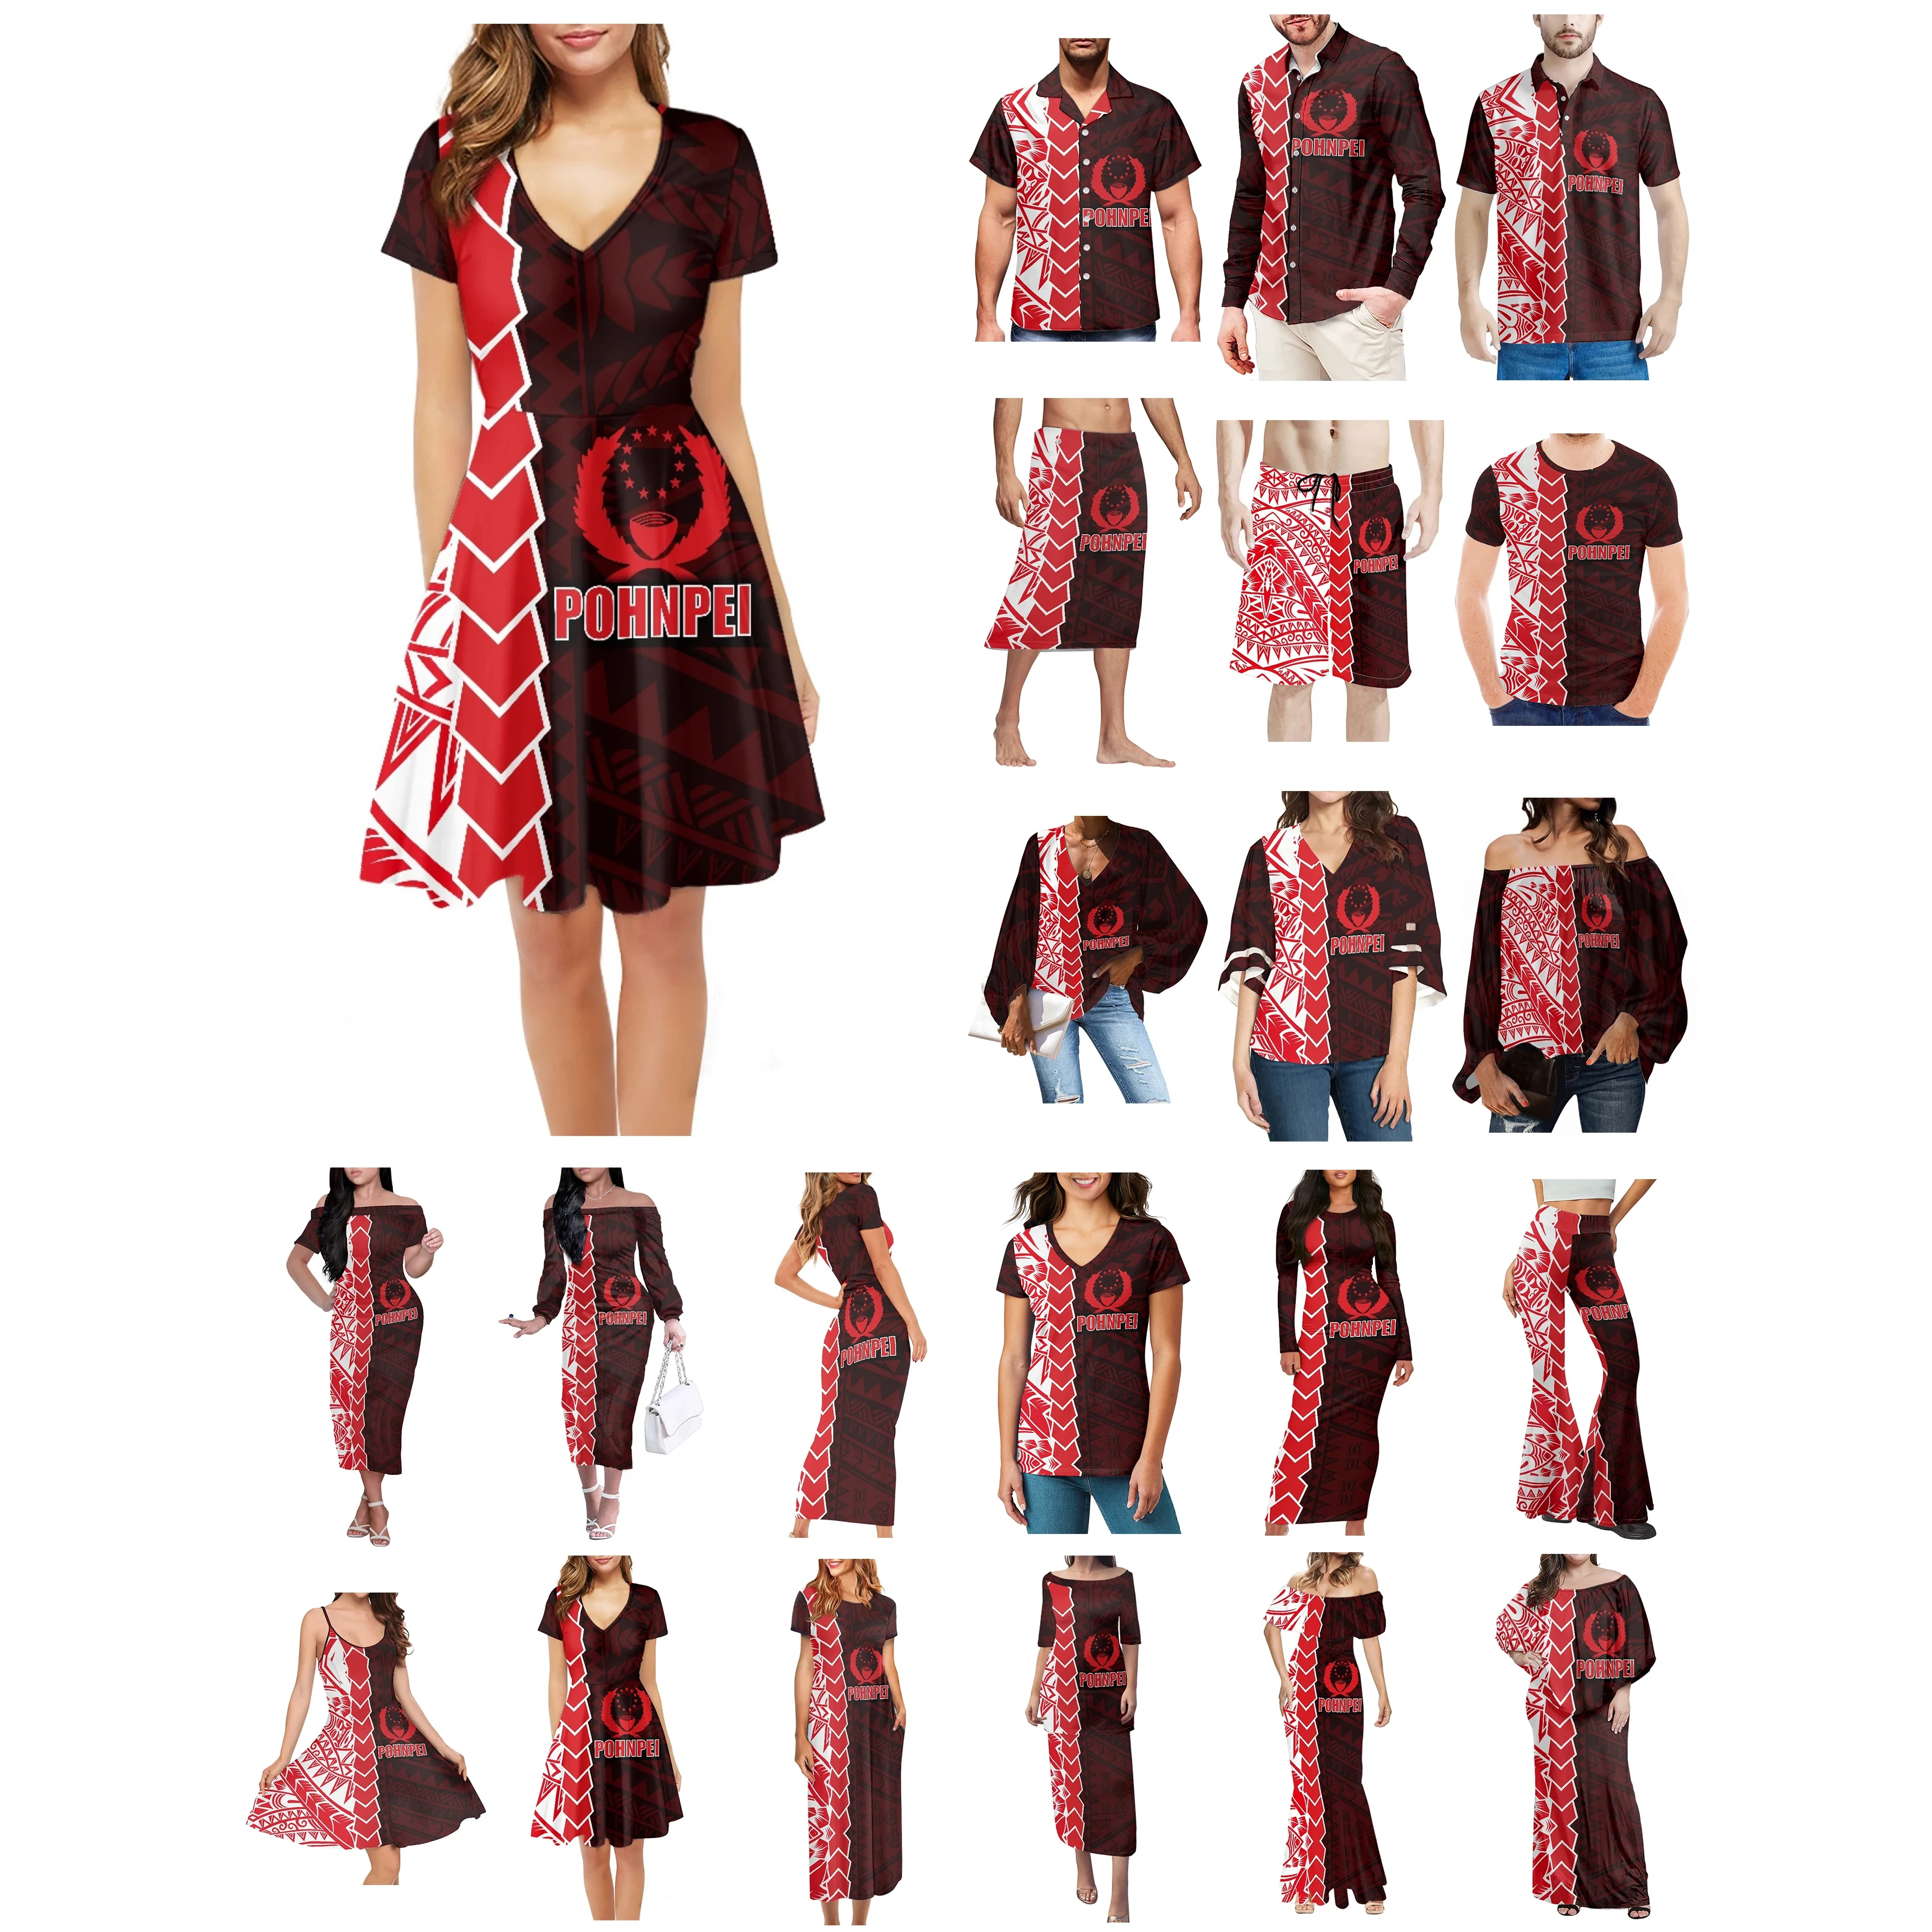 

Polynesian Pohnpei Tattoo Prints Clothes Women Dress Matching Men Shirt New Style Comfortable Casual Red And Black Lovers Clothe